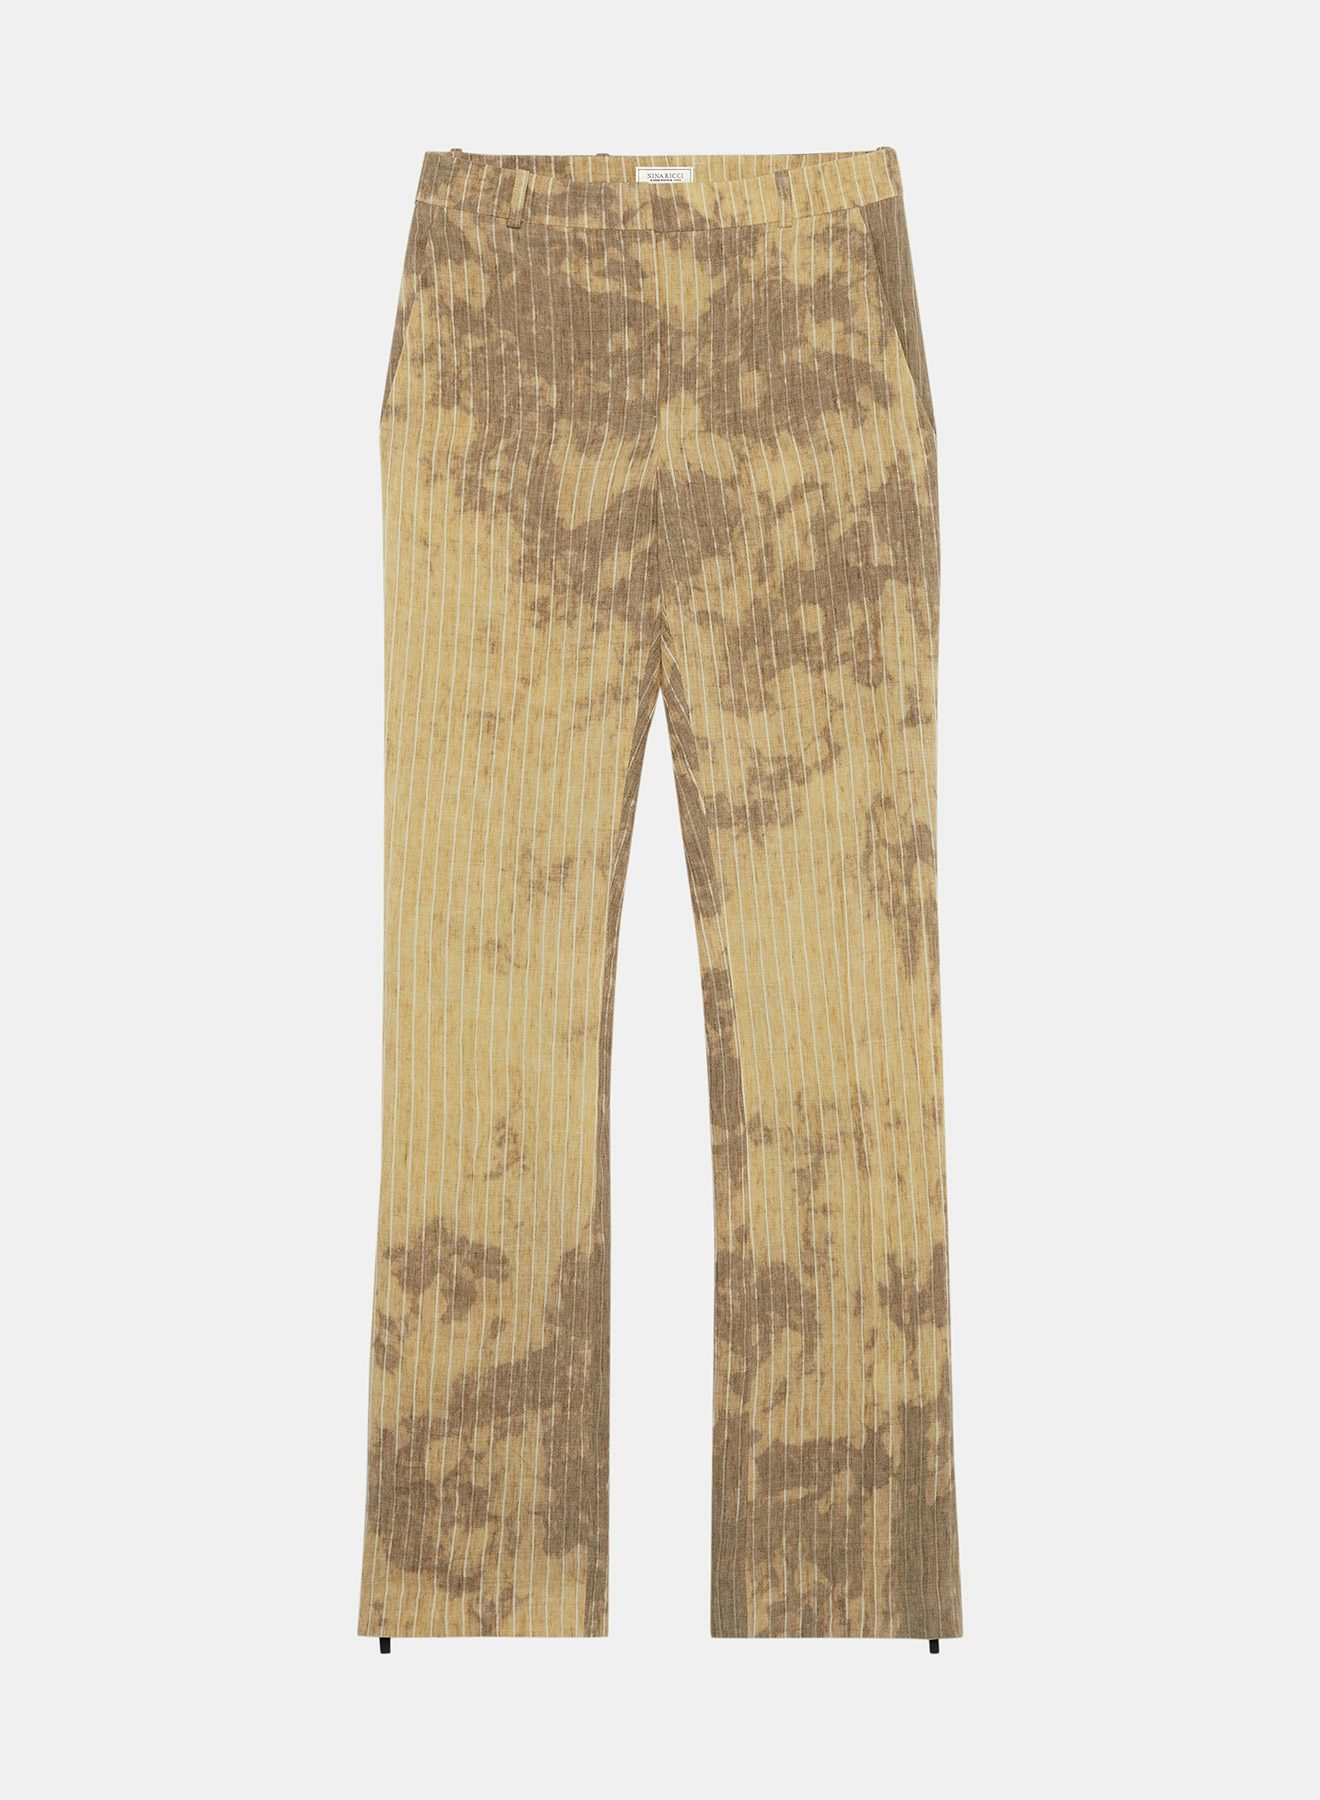 Straight pants in striped tie and dye linen with a zip at the bottom of the leg - Nina Ricci